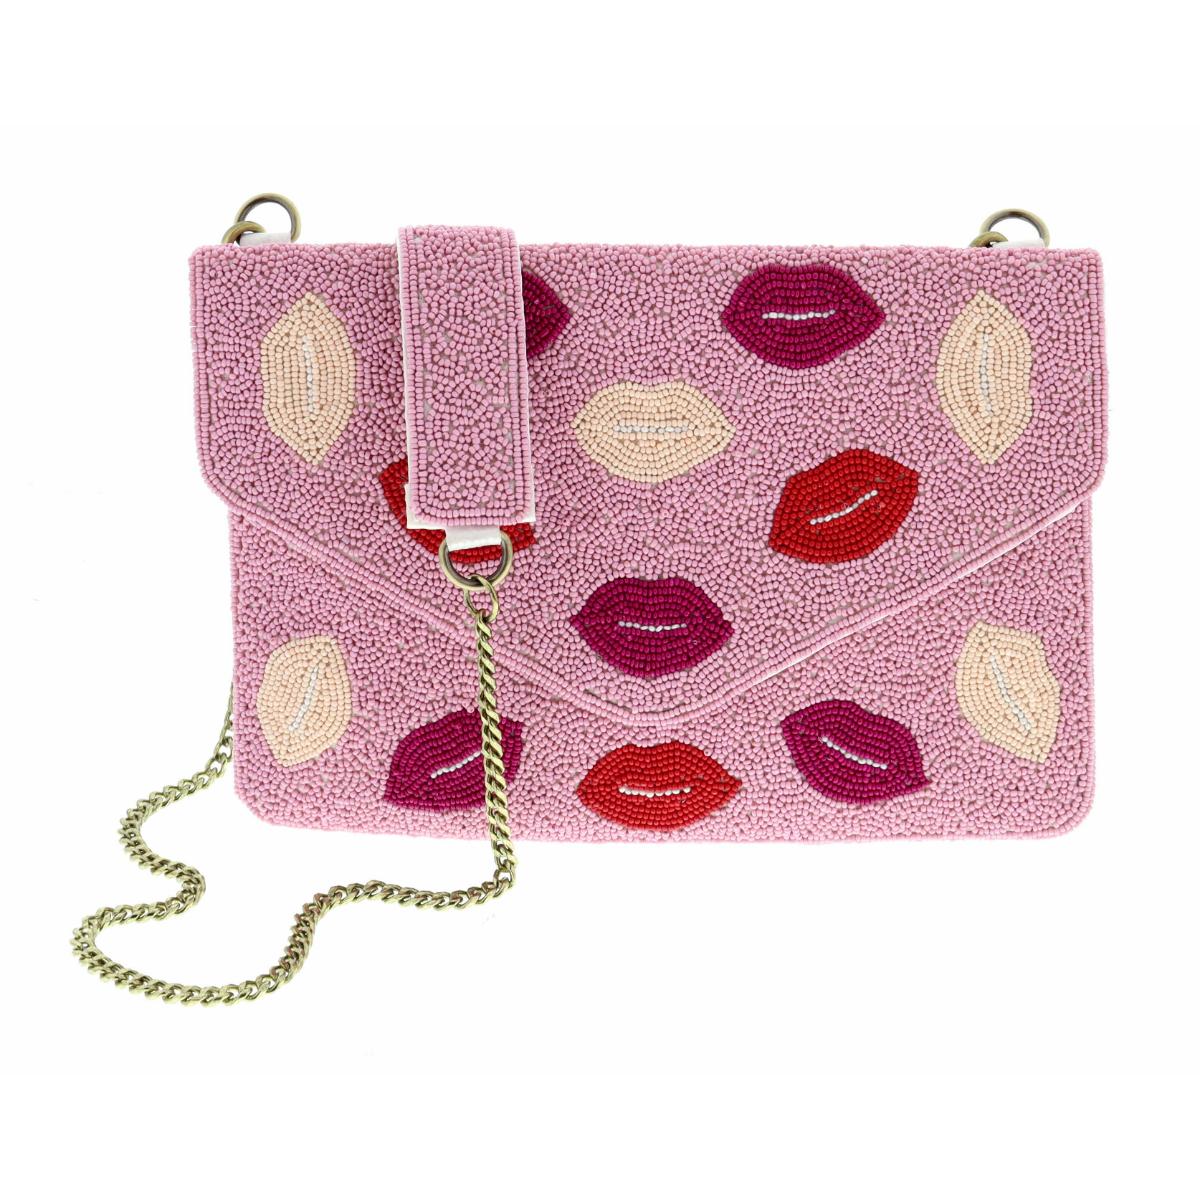 XOXO Cosmetic Bag - Bags and Clutches